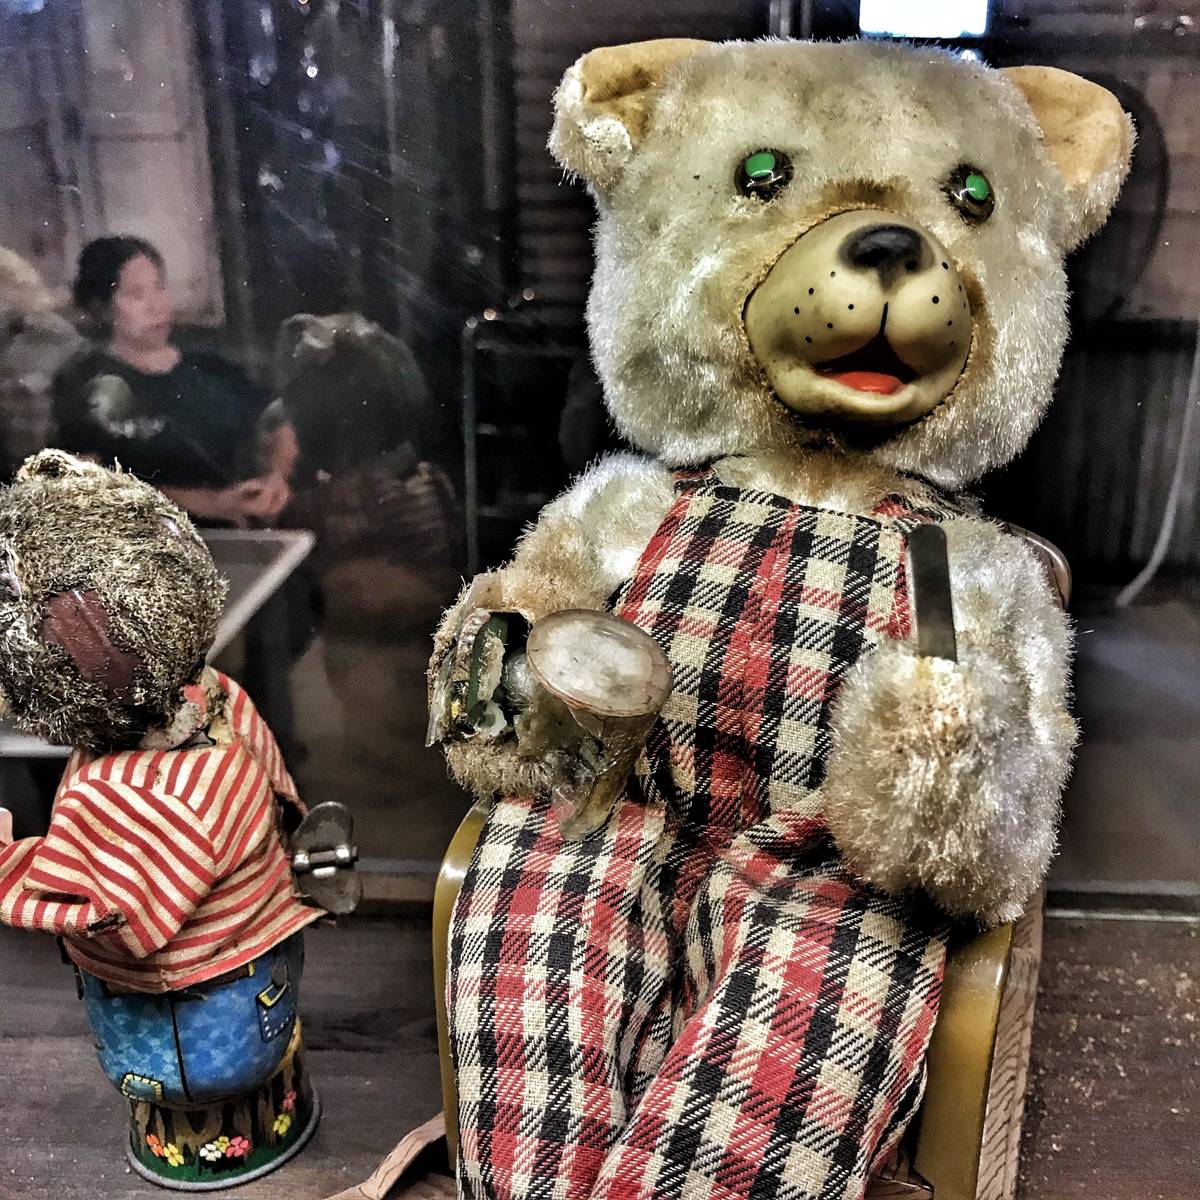 Does anyone want a new creepy teddy for their kids?